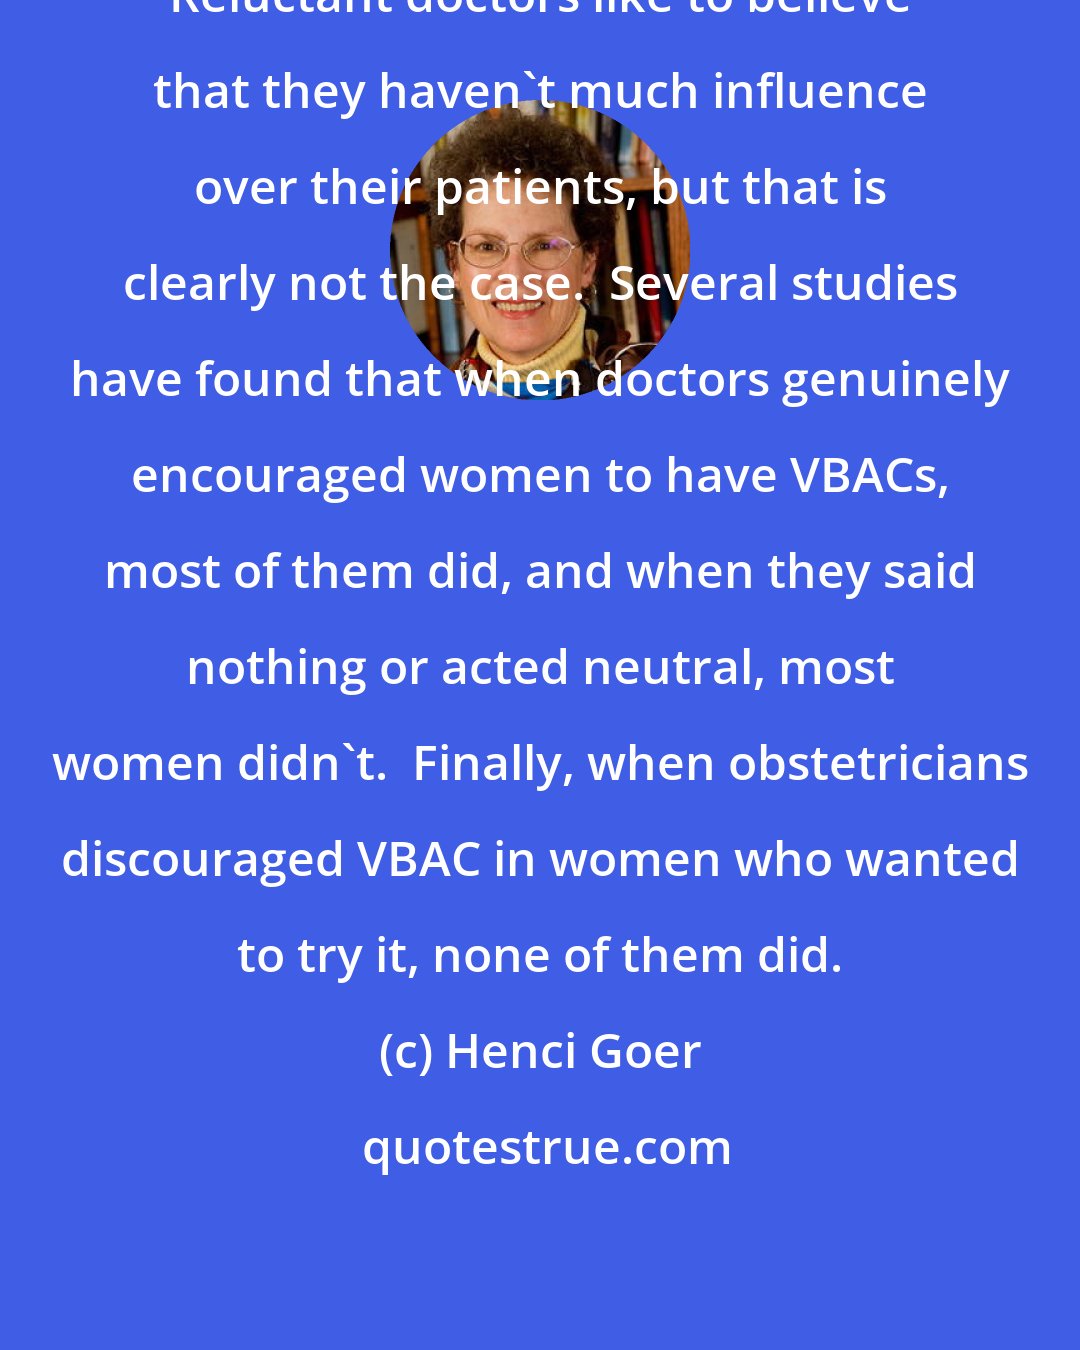 Henci Goer: Reluctant doctors like to believe that they haven't much influence over their patients, but that is clearly not the case.  Several studies have found that when doctors genuinely encouraged women to have VBACs, most of them did, and when they said nothing or acted neutral, most women didn't.  Finally, when obstetricians discouraged VBAC in women who wanted to try it, none of them did.